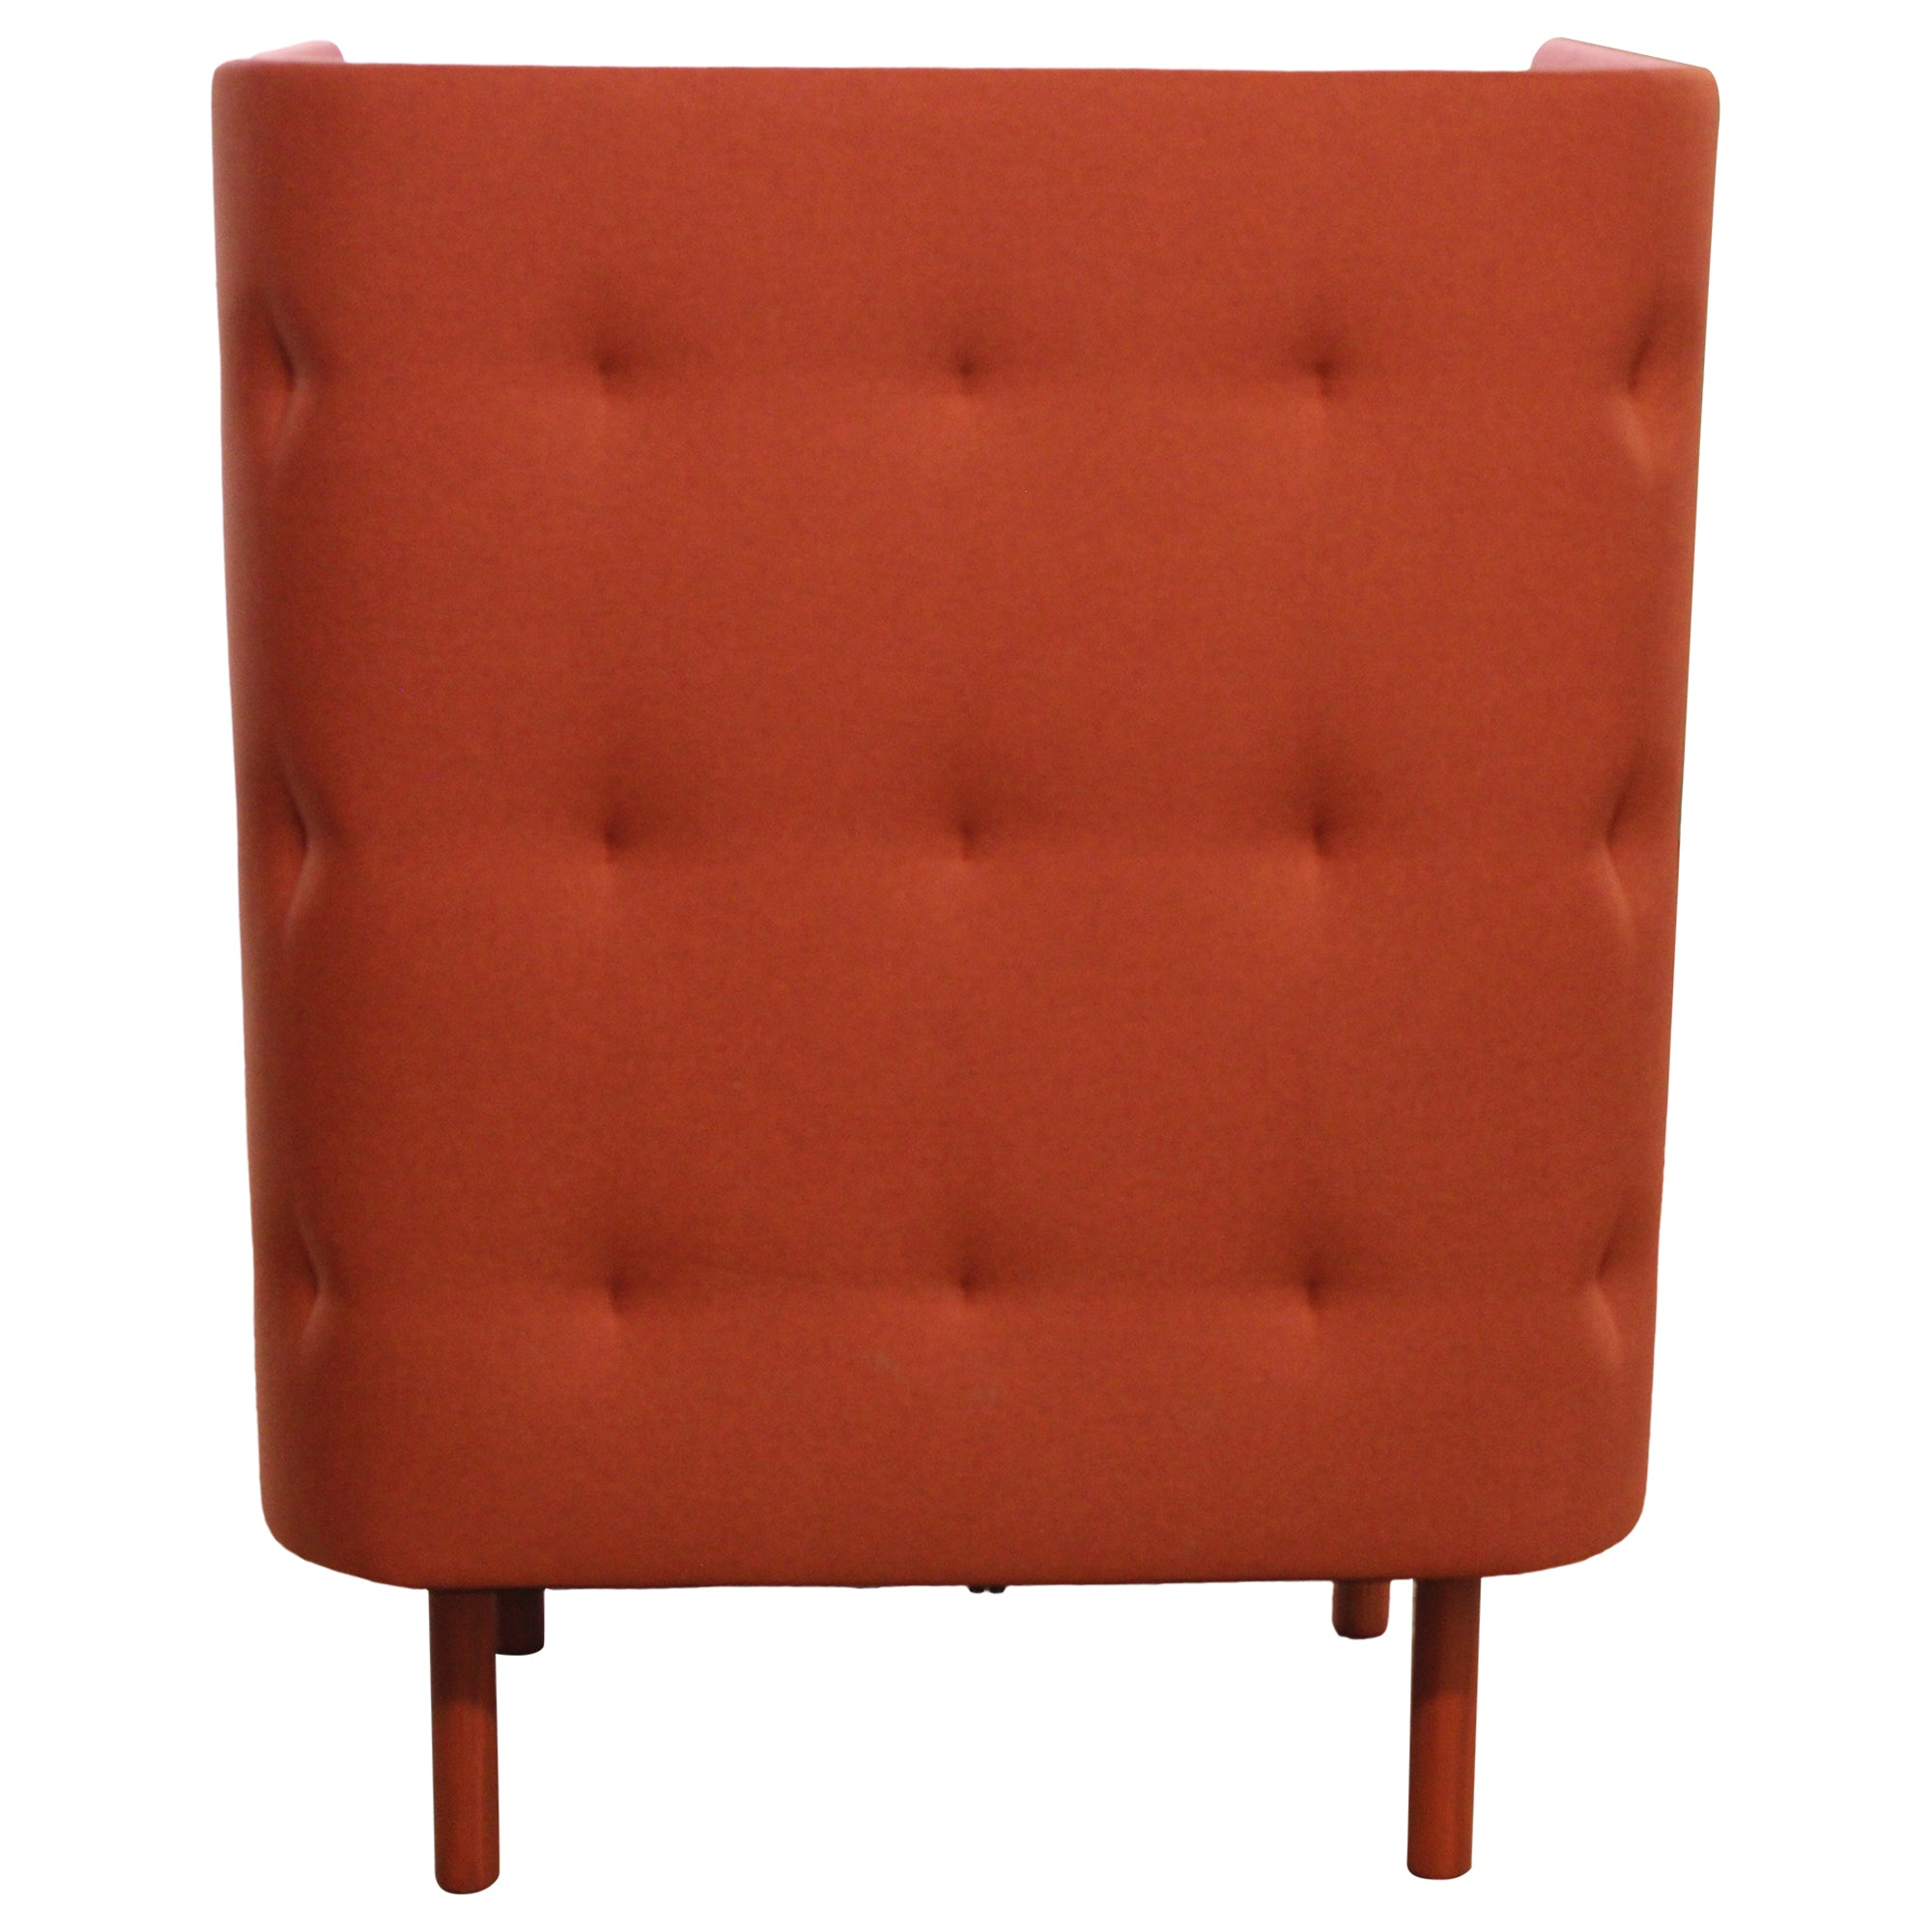 Poppin QT Privacy Lounge Chair w/ Ottoman - Preowned